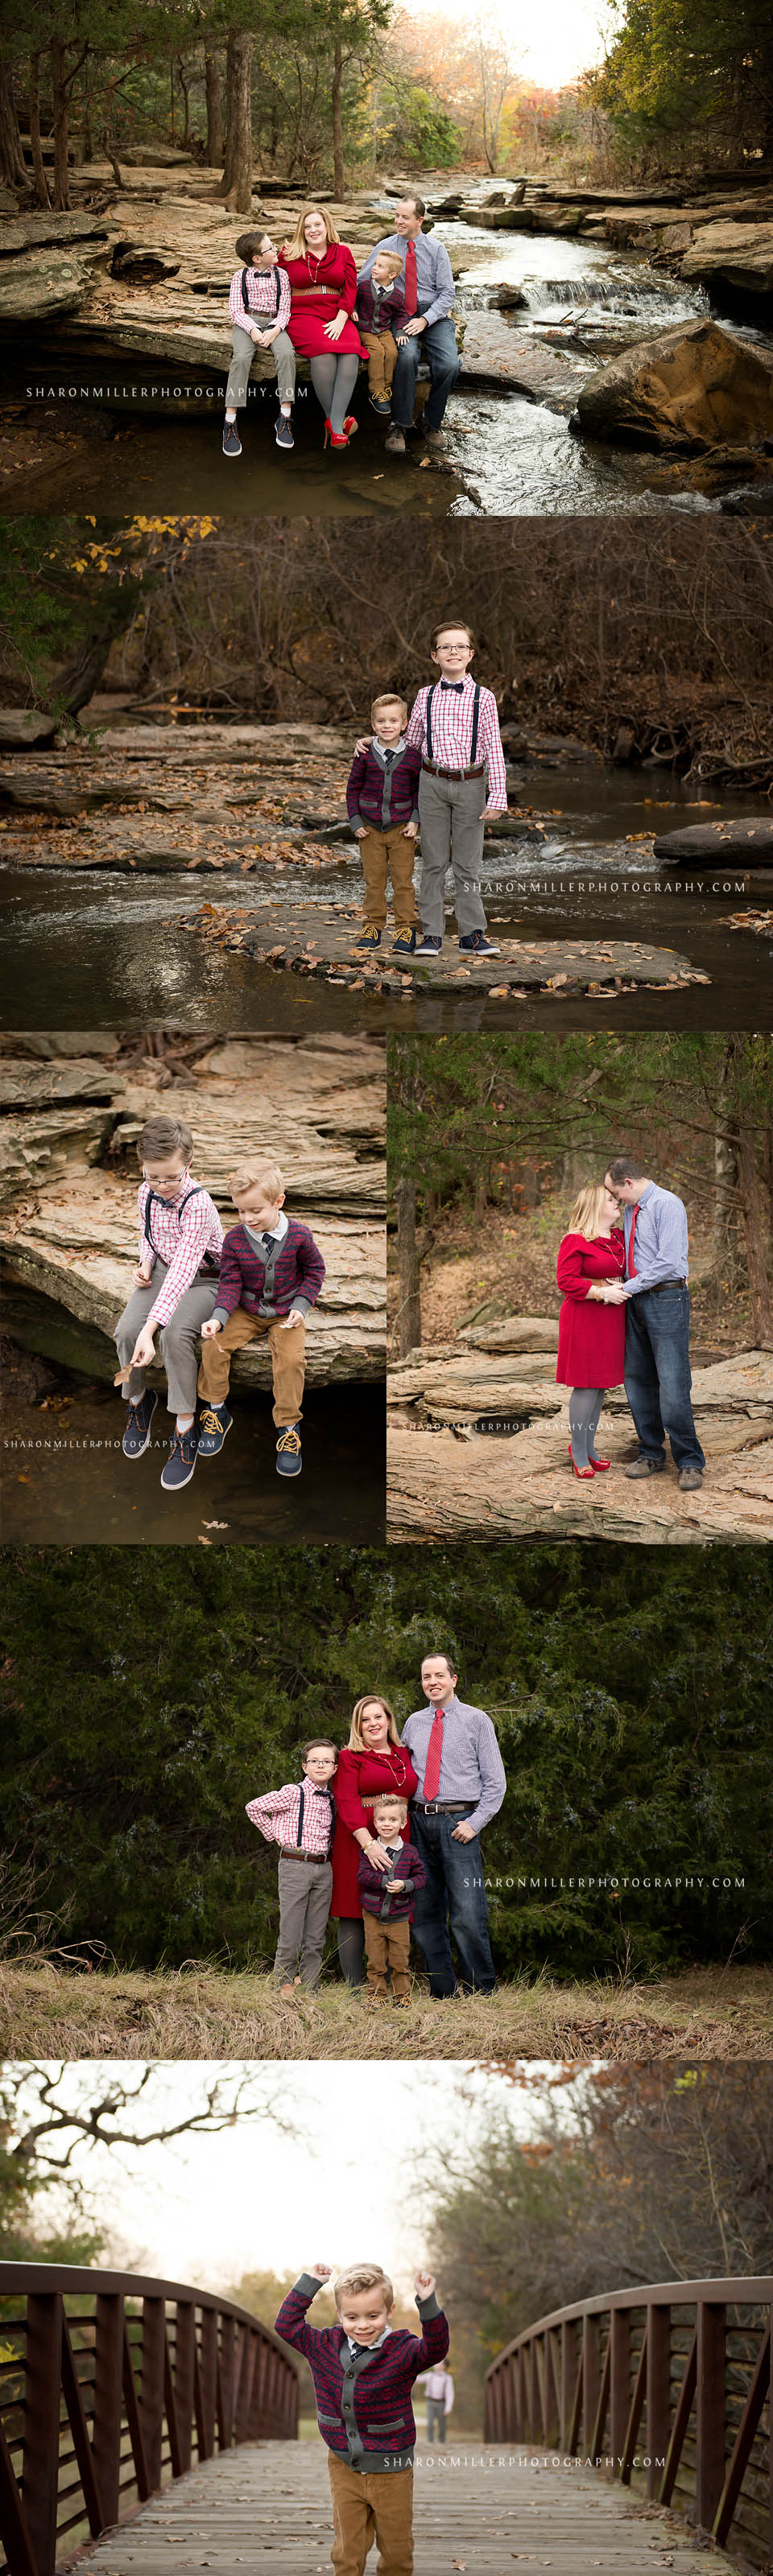 family portrait session at Stone Creek by Flower Mound family photographer Sharon Miller